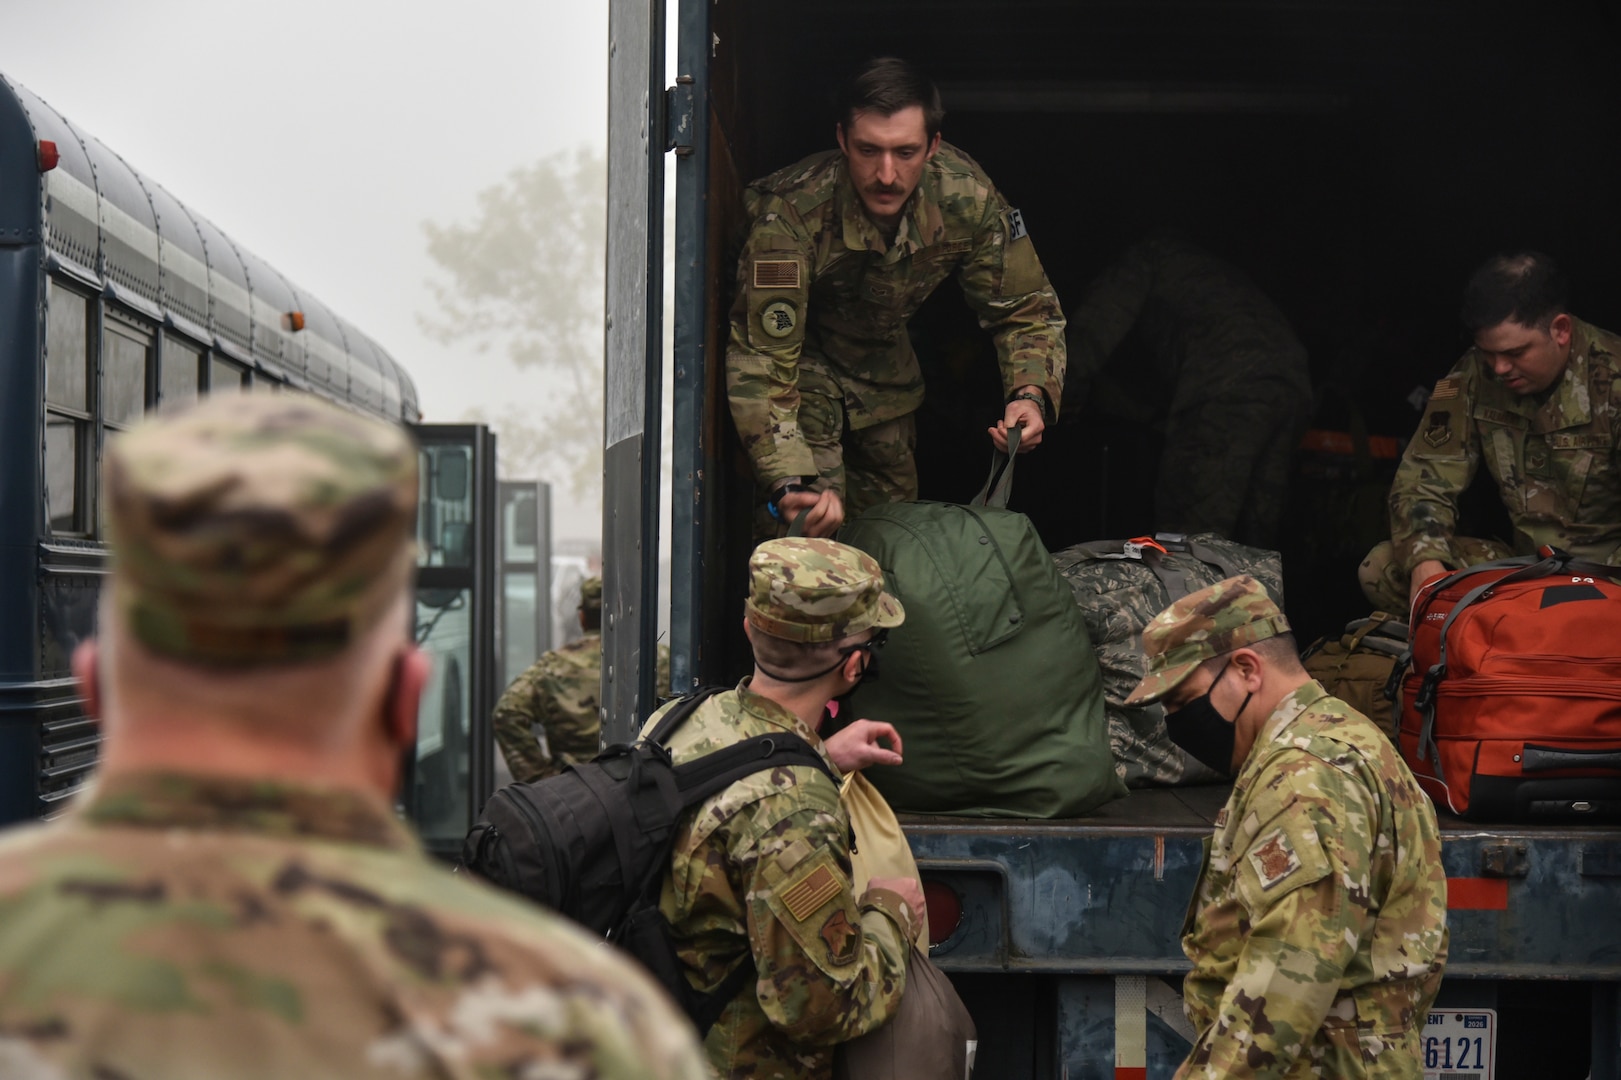 Oregon Air National Guard members from the 142nd Wing load gear in a truck before leaving from the Portland Air National Guard Base, Portland, Ore., Sept. 13, 2020. The Airmen departed to support Operation Plan Smokey, an interagency wildfire relief effort in the state.